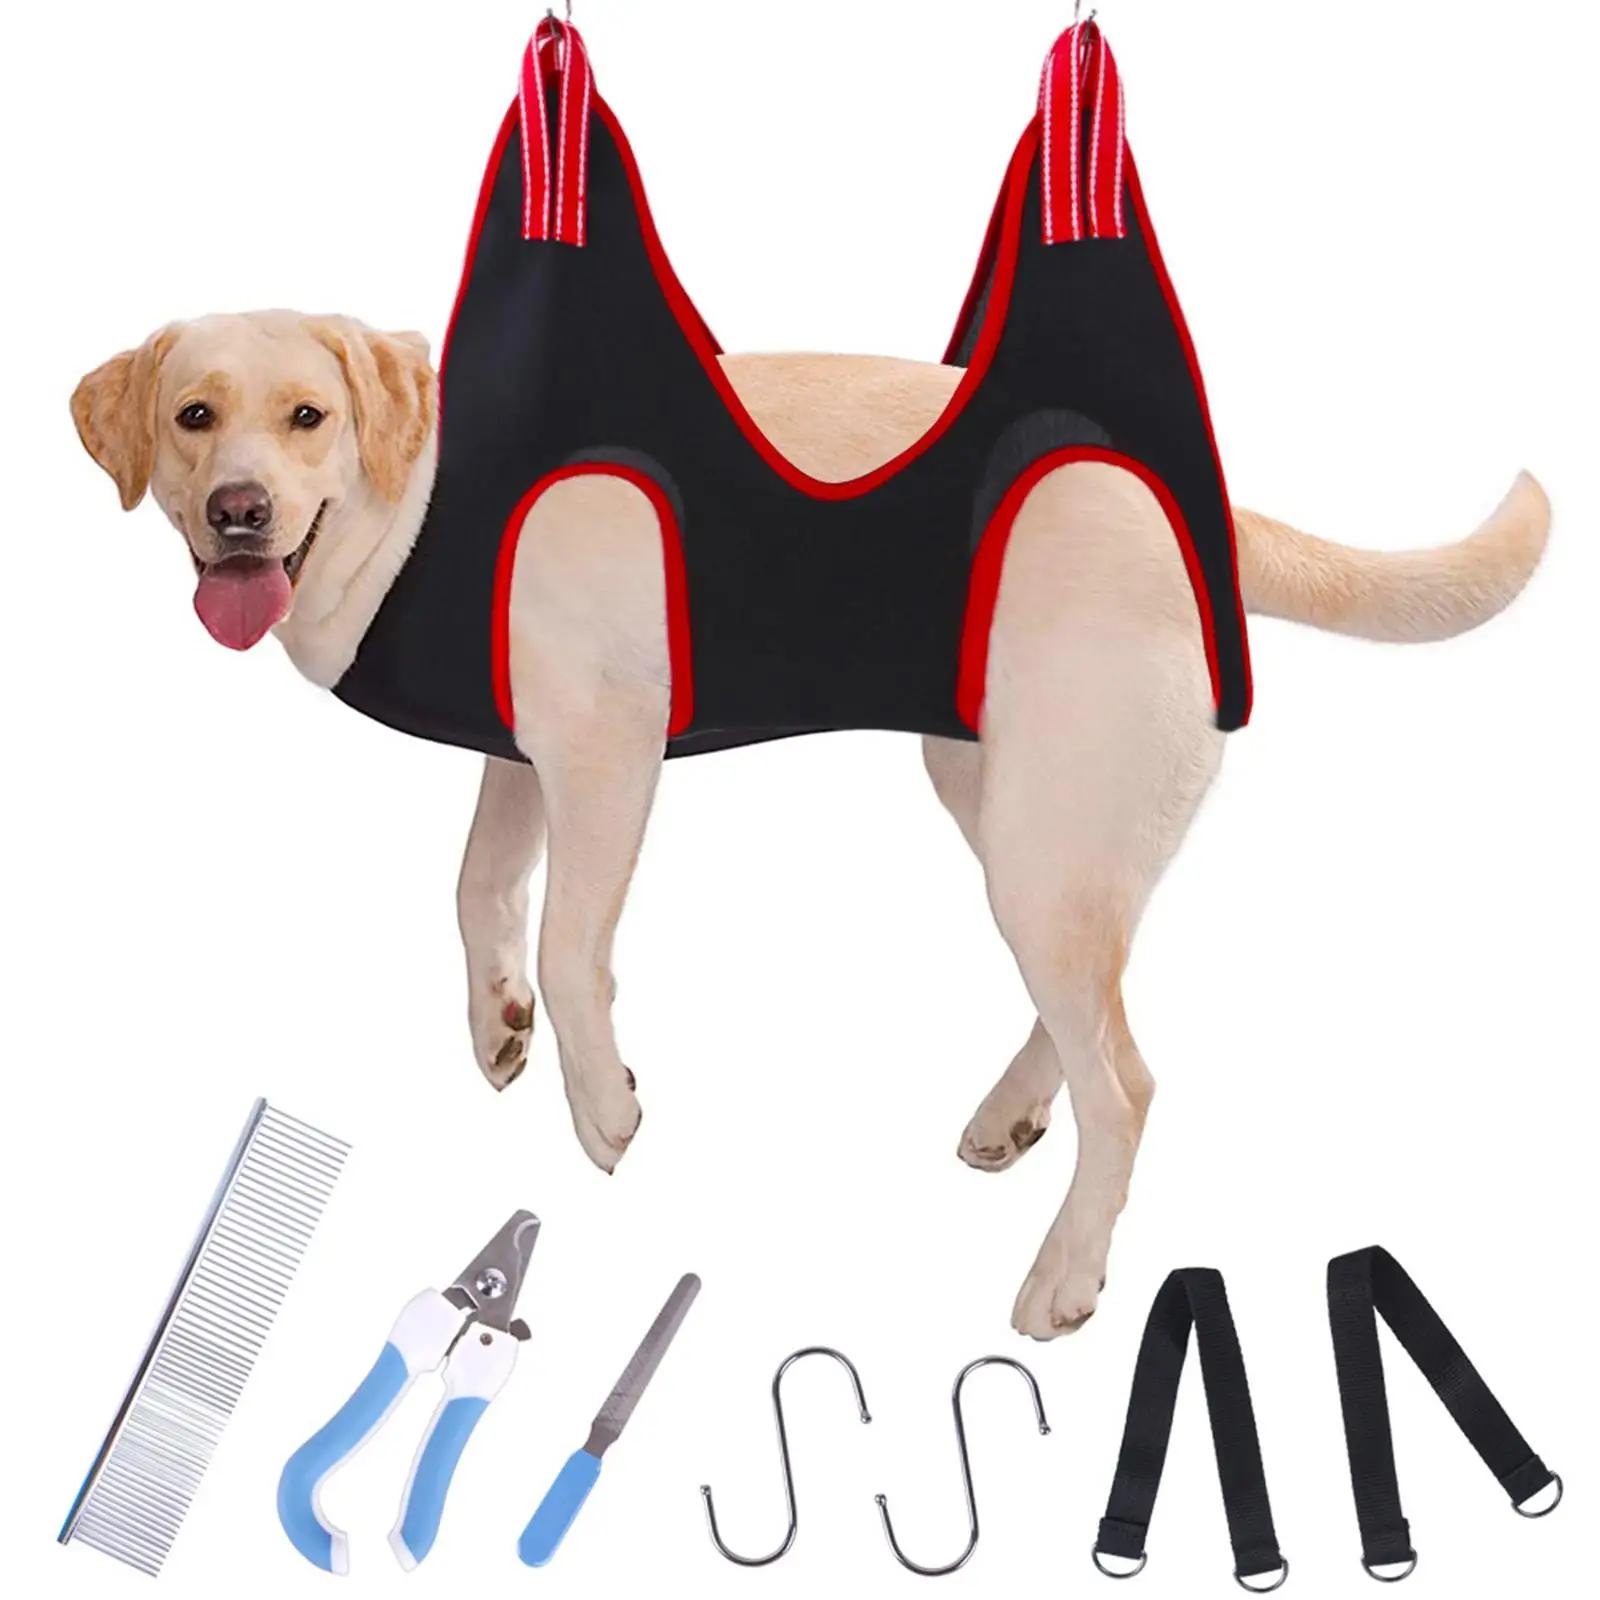 Breathable Cat Dog Grooming Hammock Helper Restraint Bag Multifunctional for Examine Cats Dogs Nail Clipping Nail Trimming